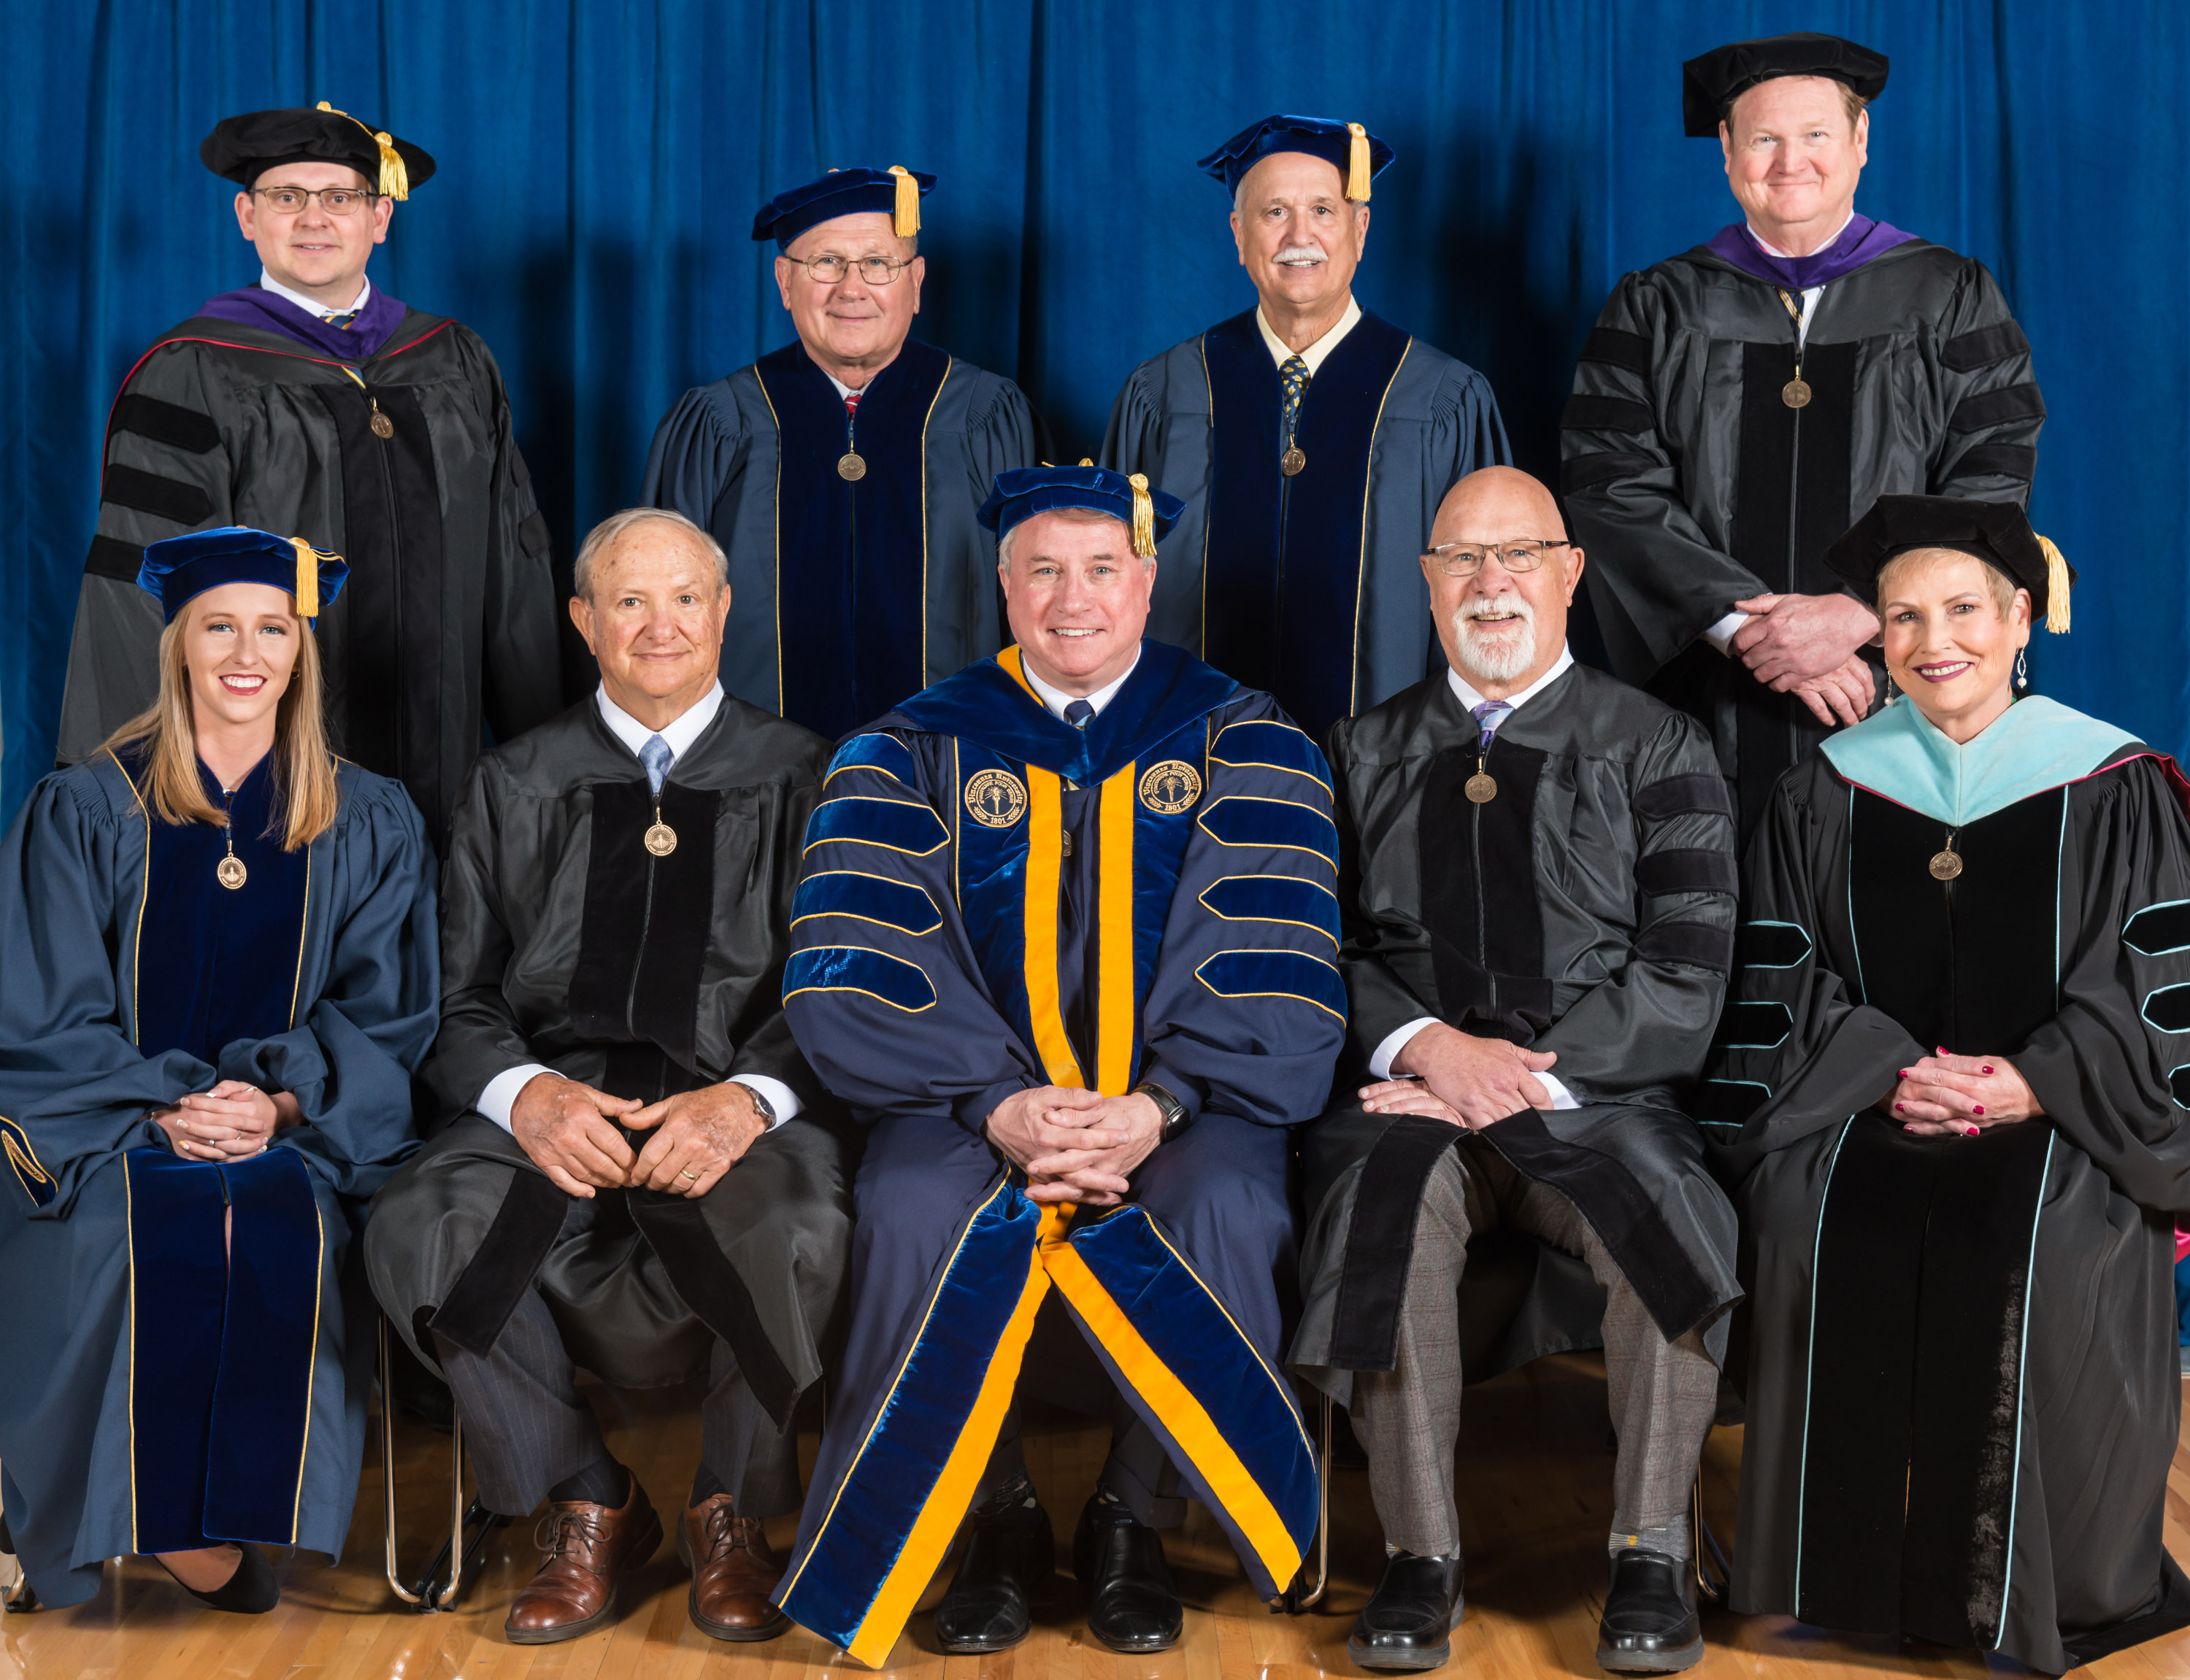 Vincennes University Board of Trustees and Honorary Degree Recipients Dr. Tim Brown and Luke Kenley